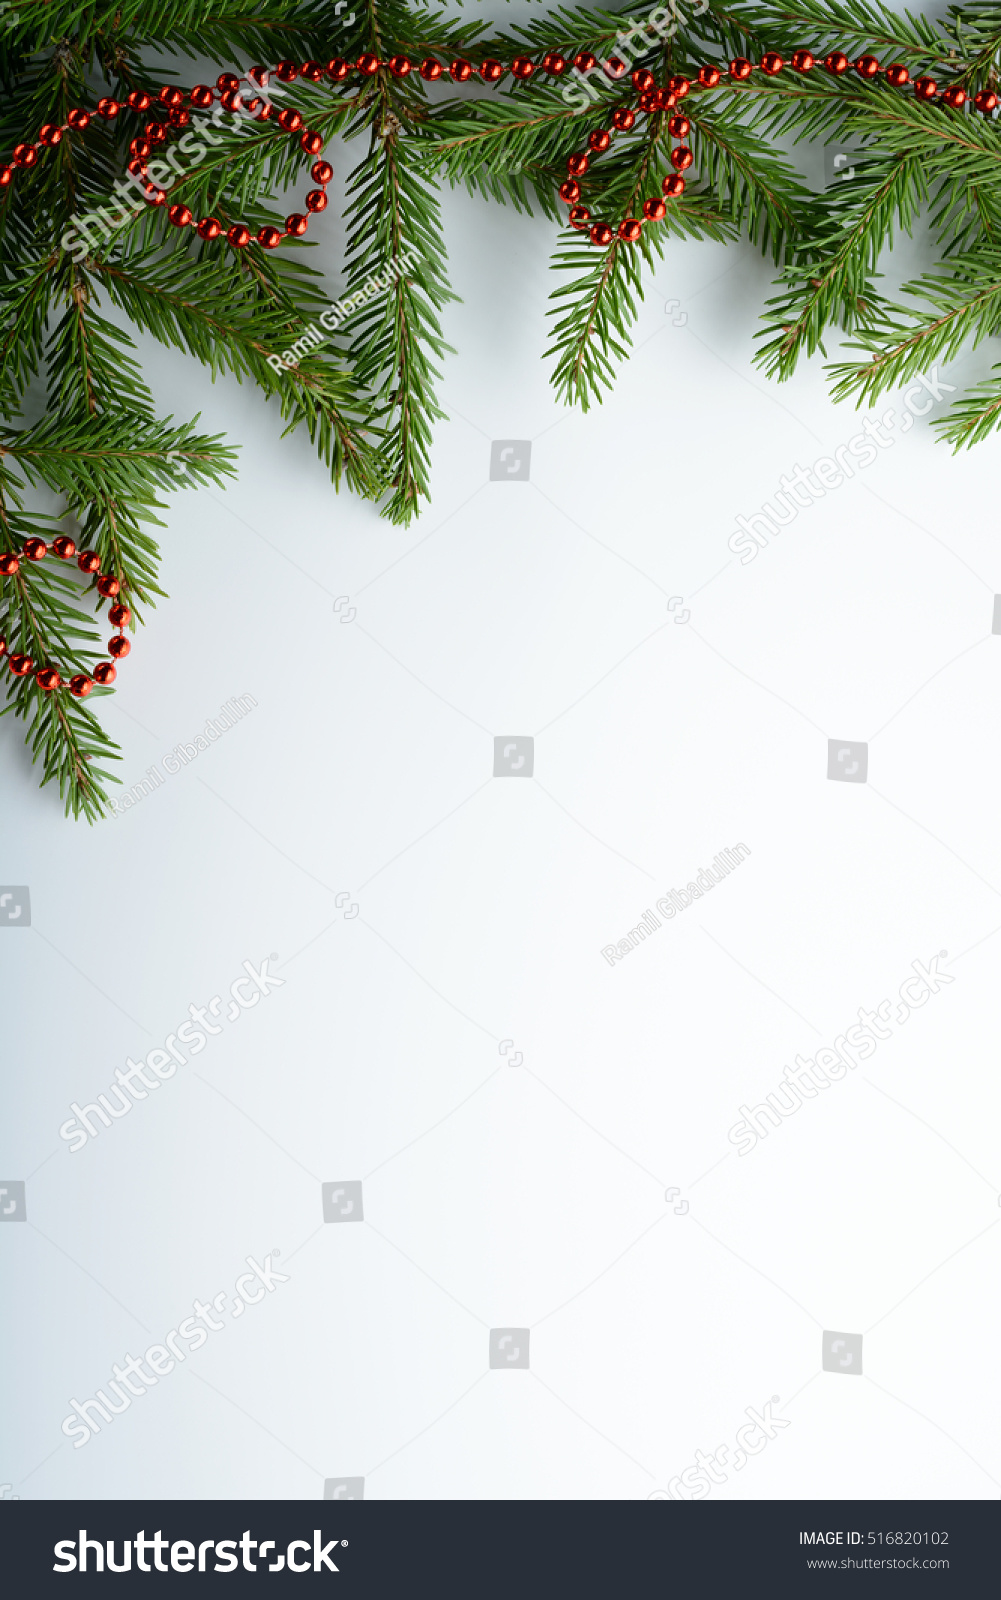 Spruce branches and red beads on a white background #516820102